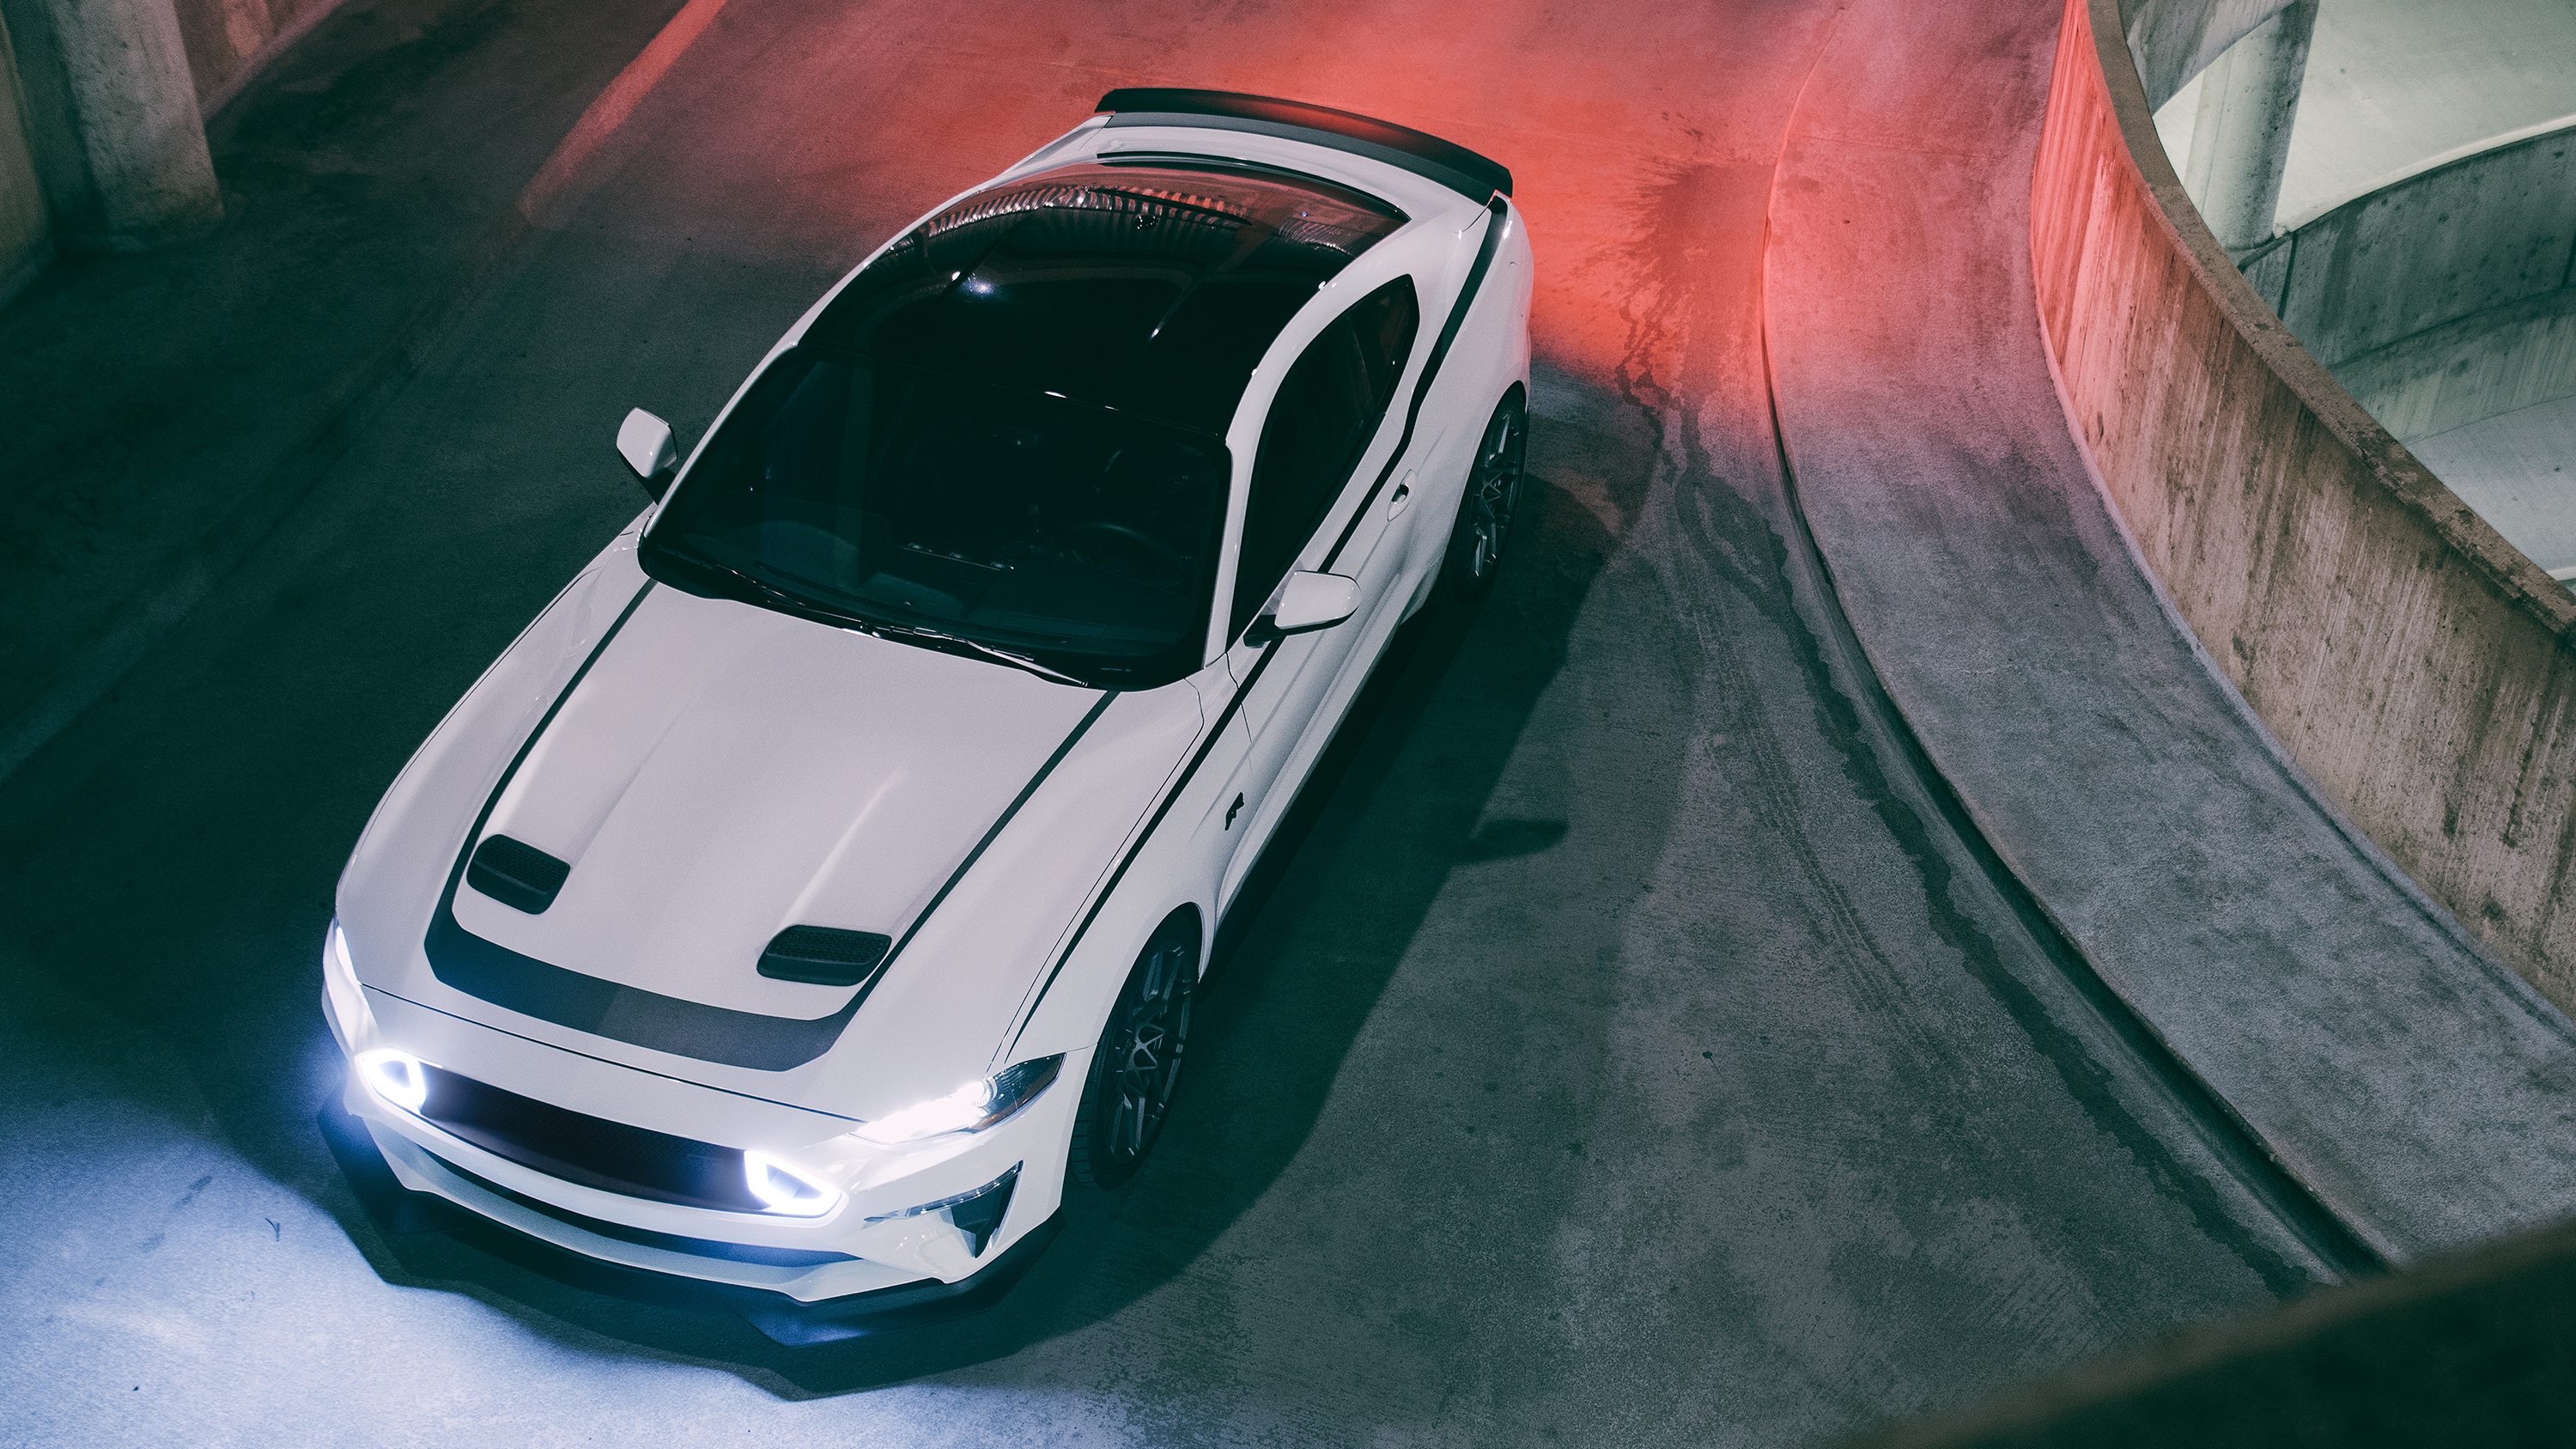 Hands up: who wants a 700bhp+ Ford Mustang RTR?